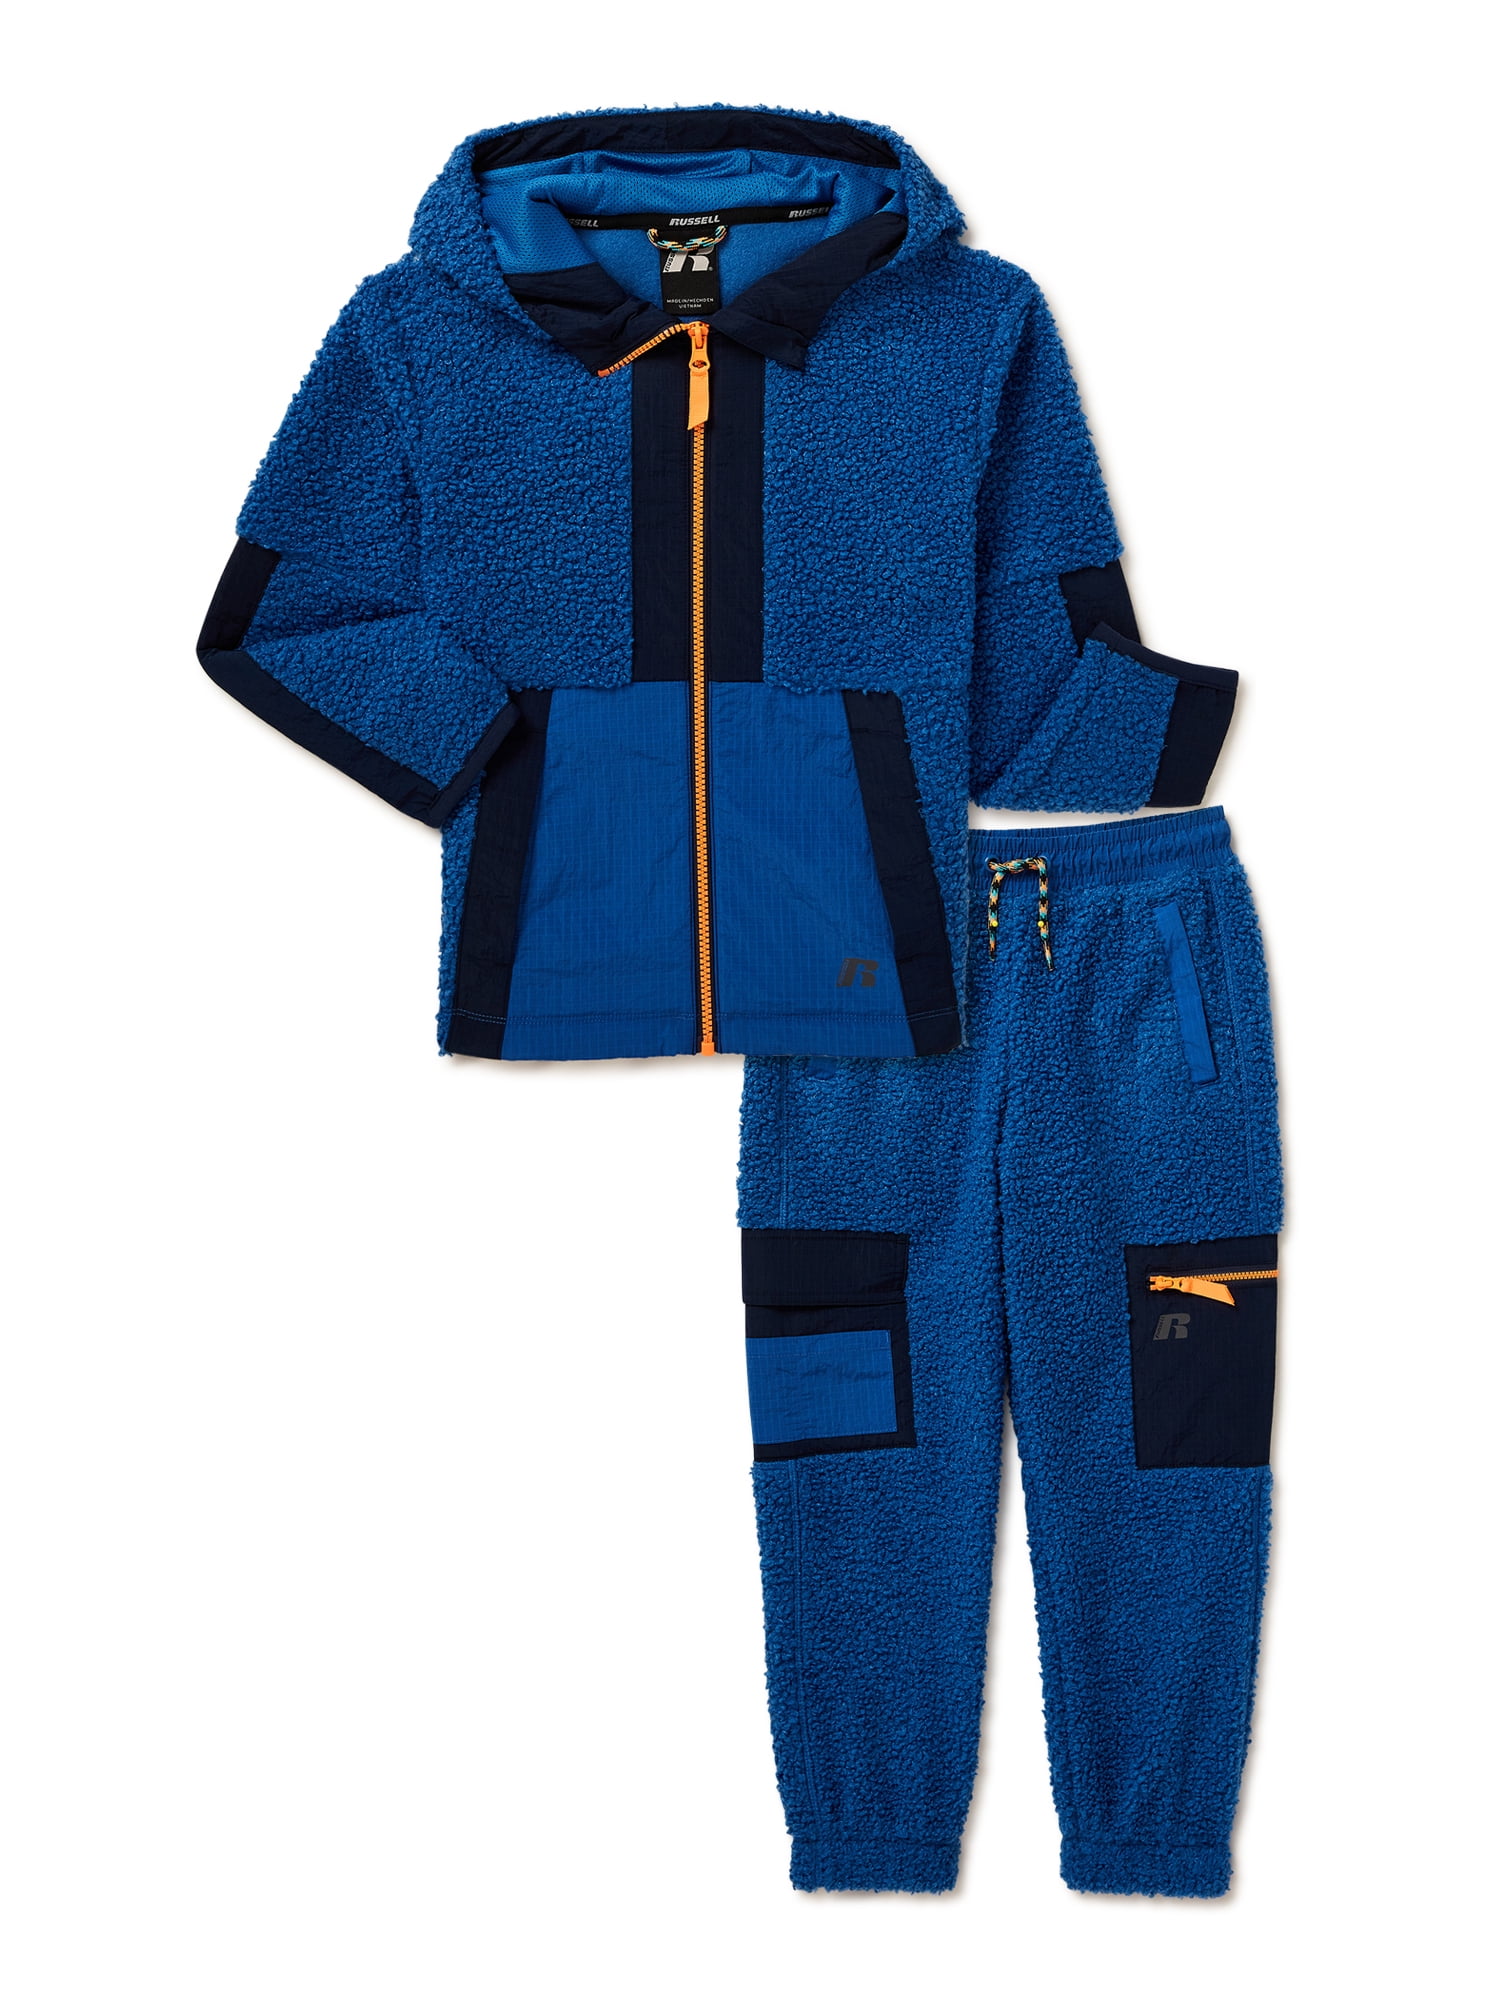 Russell Boys Faux Sherpa Zip Hoodie Jacket and Pants Set, 2-Piece ...